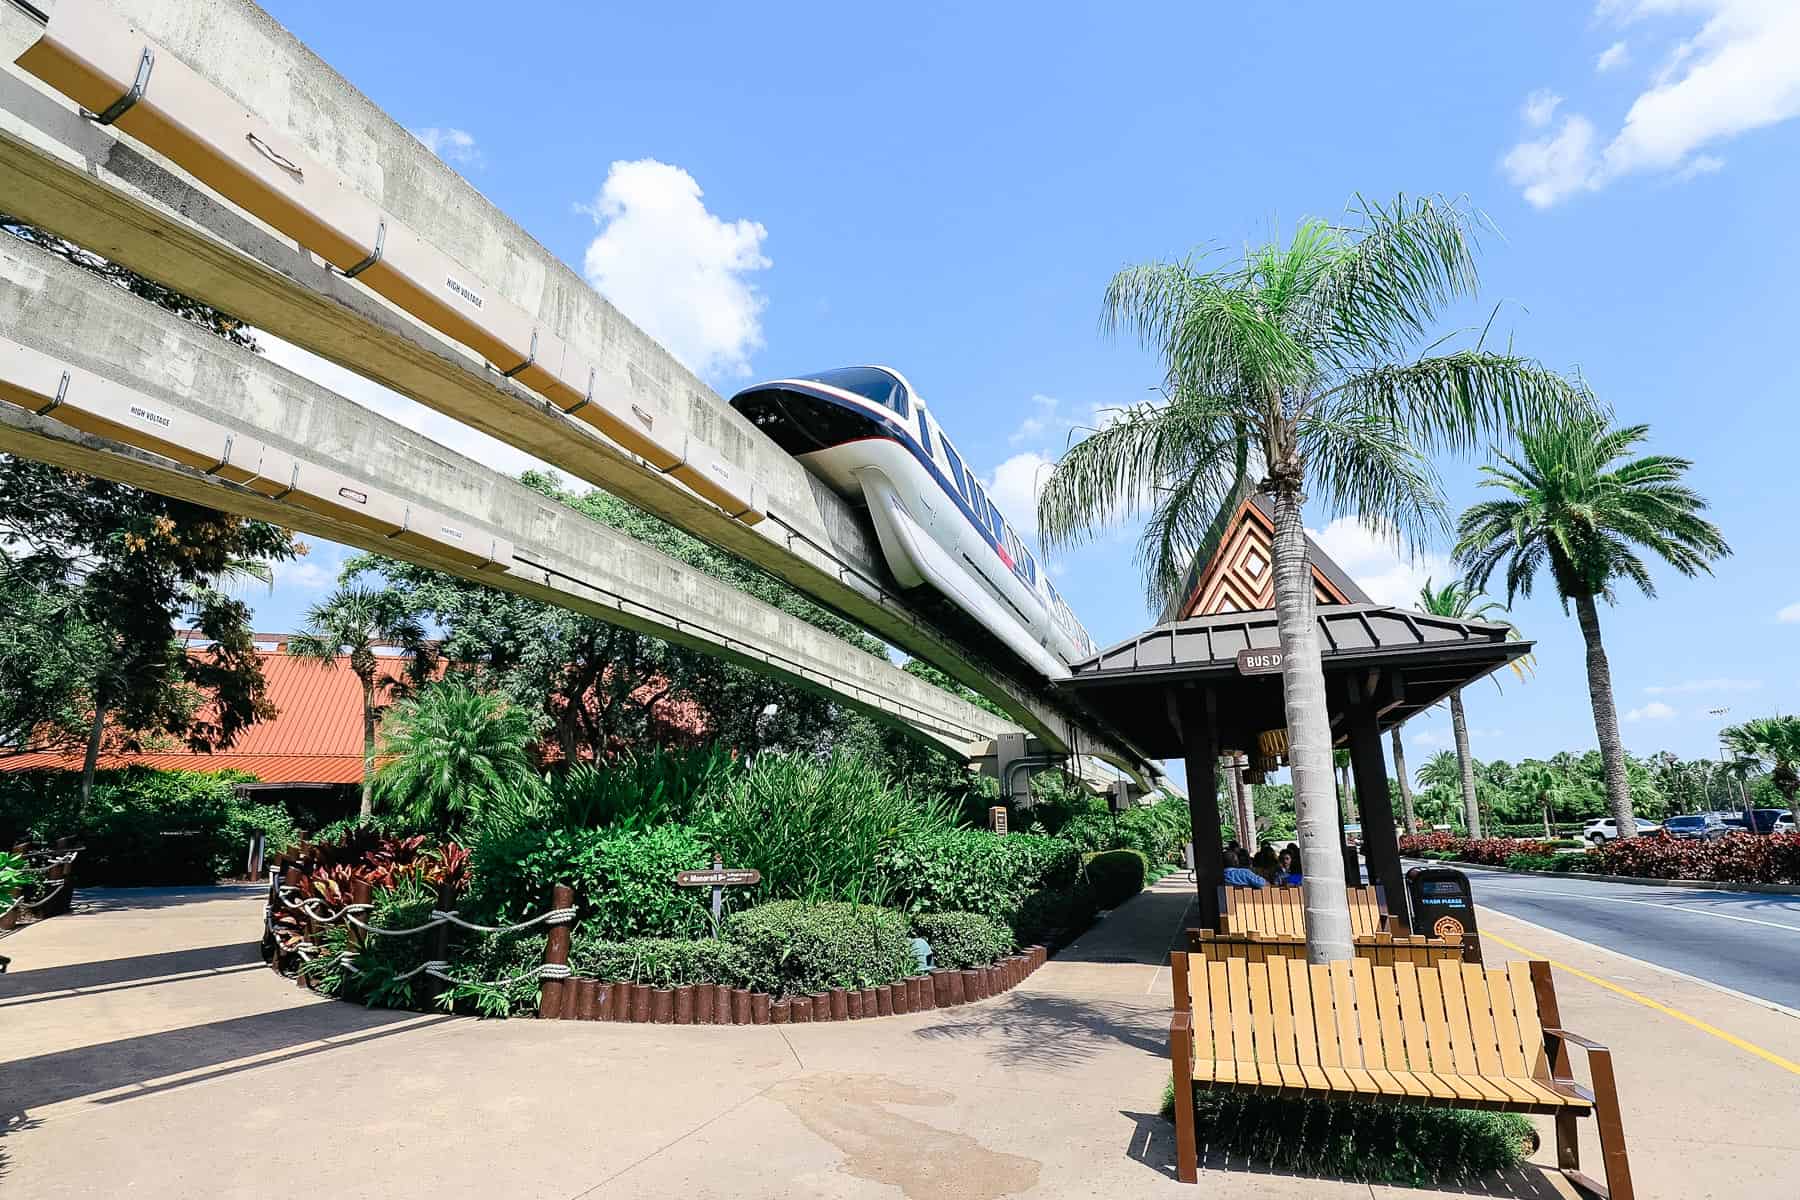 a monorail and bus stop at a Disney Resort 